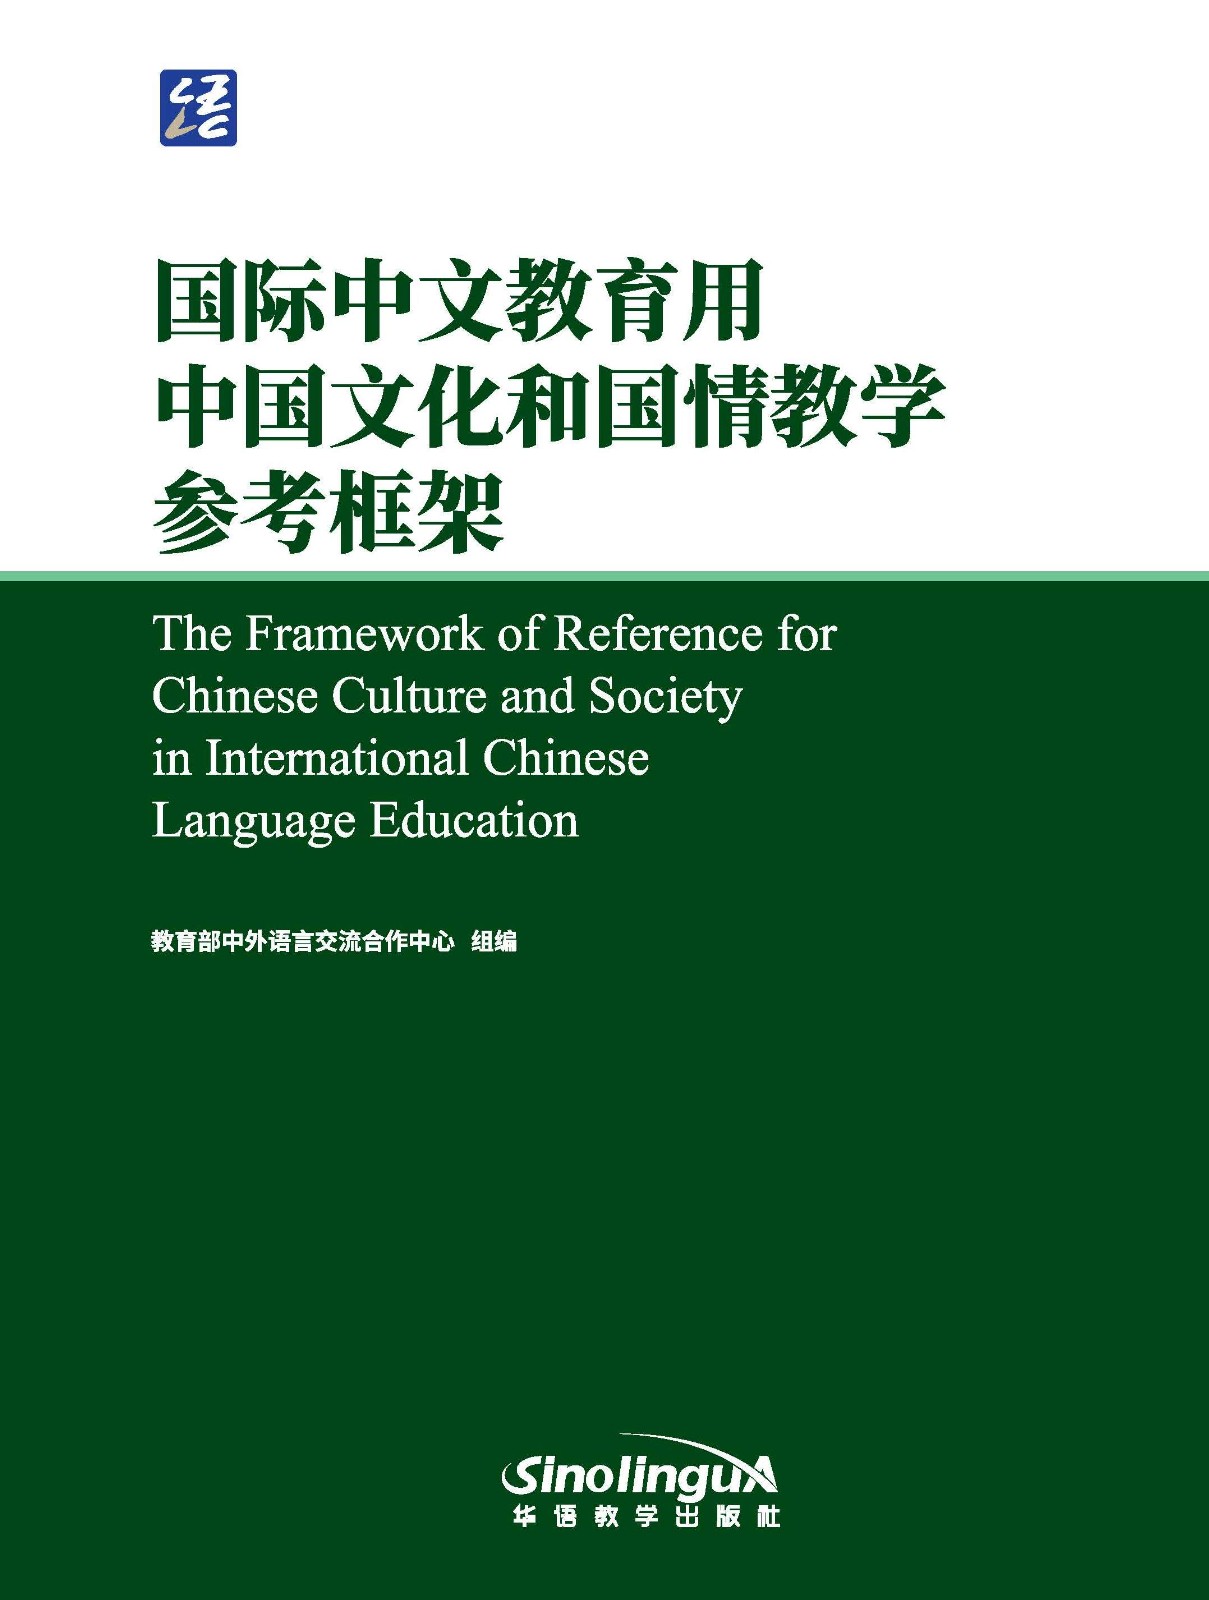 The Framework of Reference for Chinese Culture and Society in International Chinese Language Education